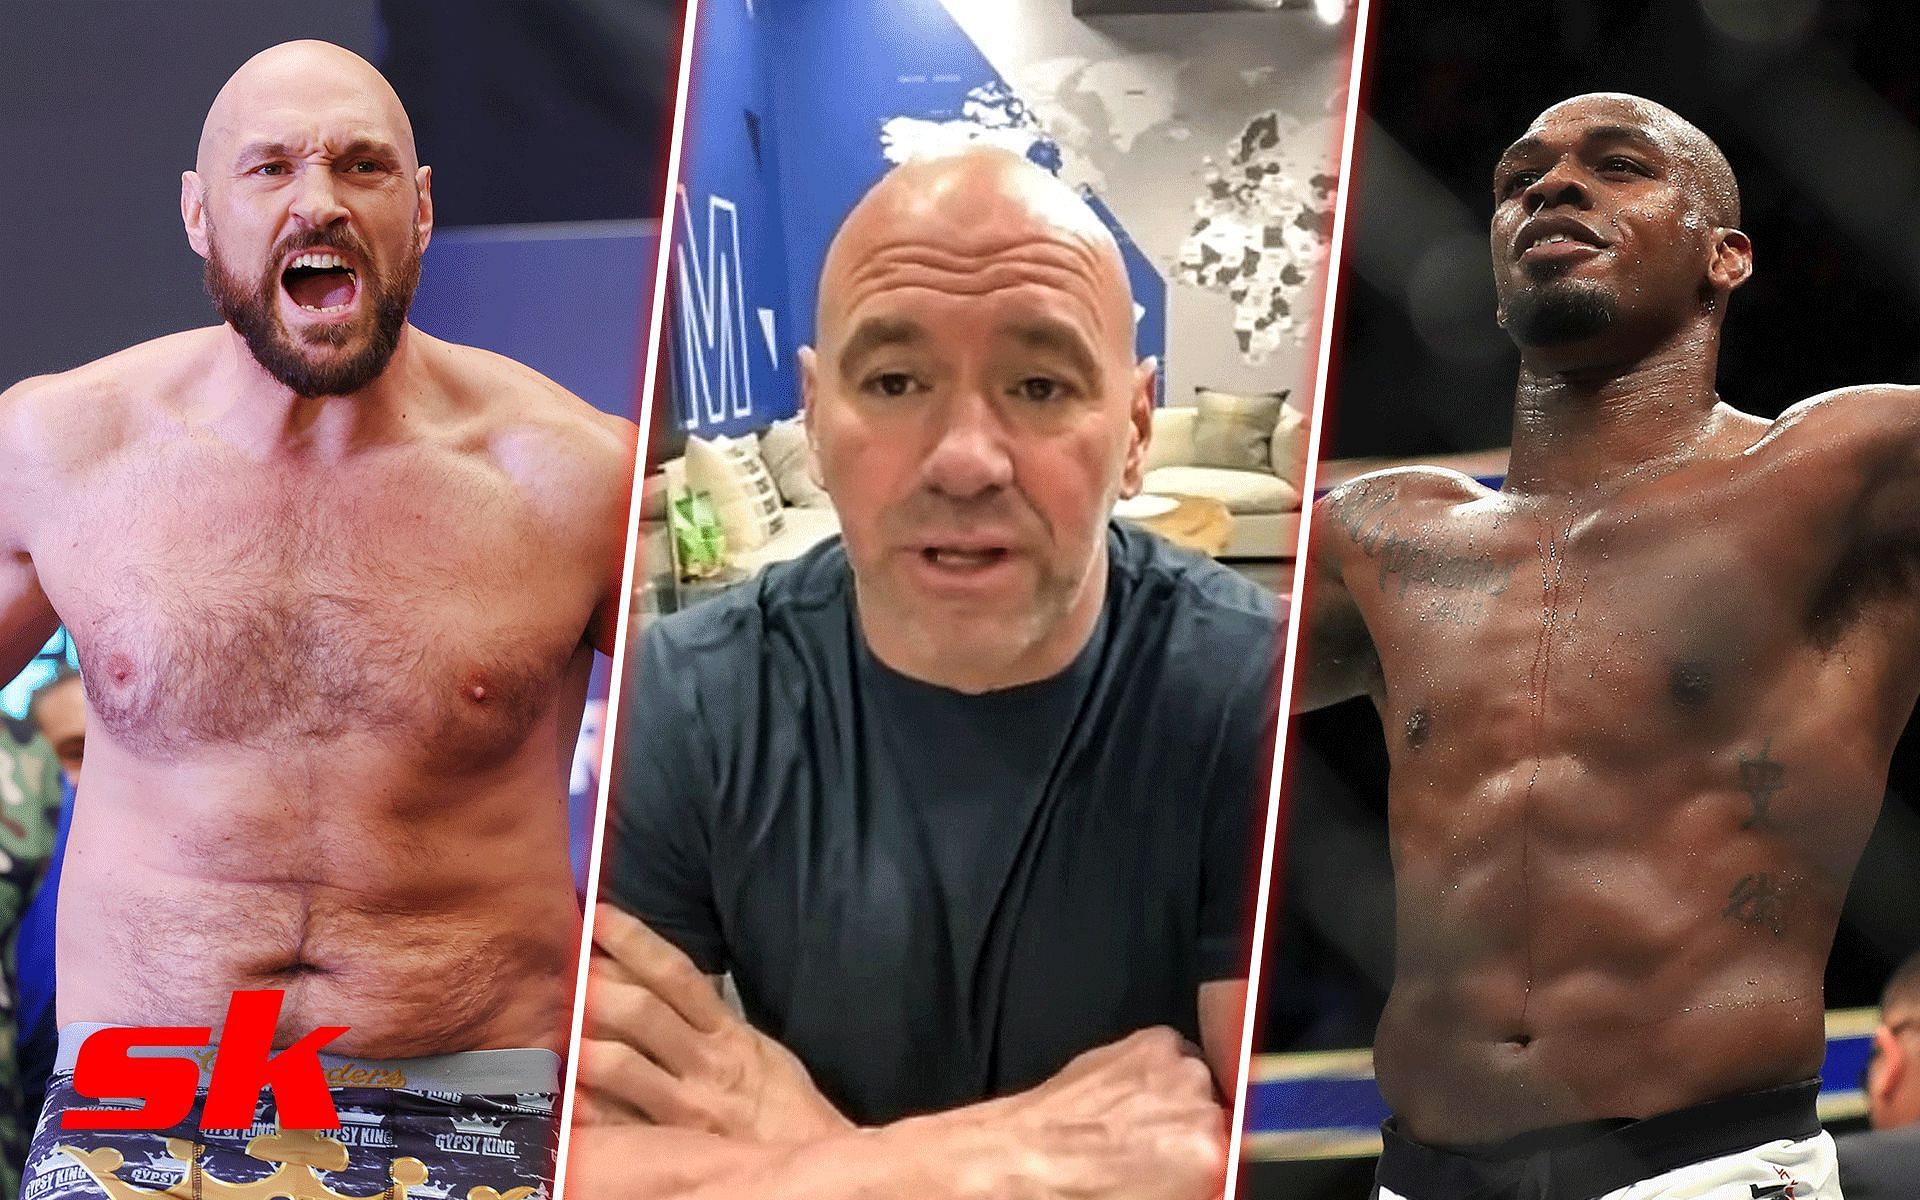 Tyson Fury (Left); Dana White (Middle); Jon Jones (Right) [*Image courtesy: left and right images via Getty Images; middle image via BroBible YouTube channel]